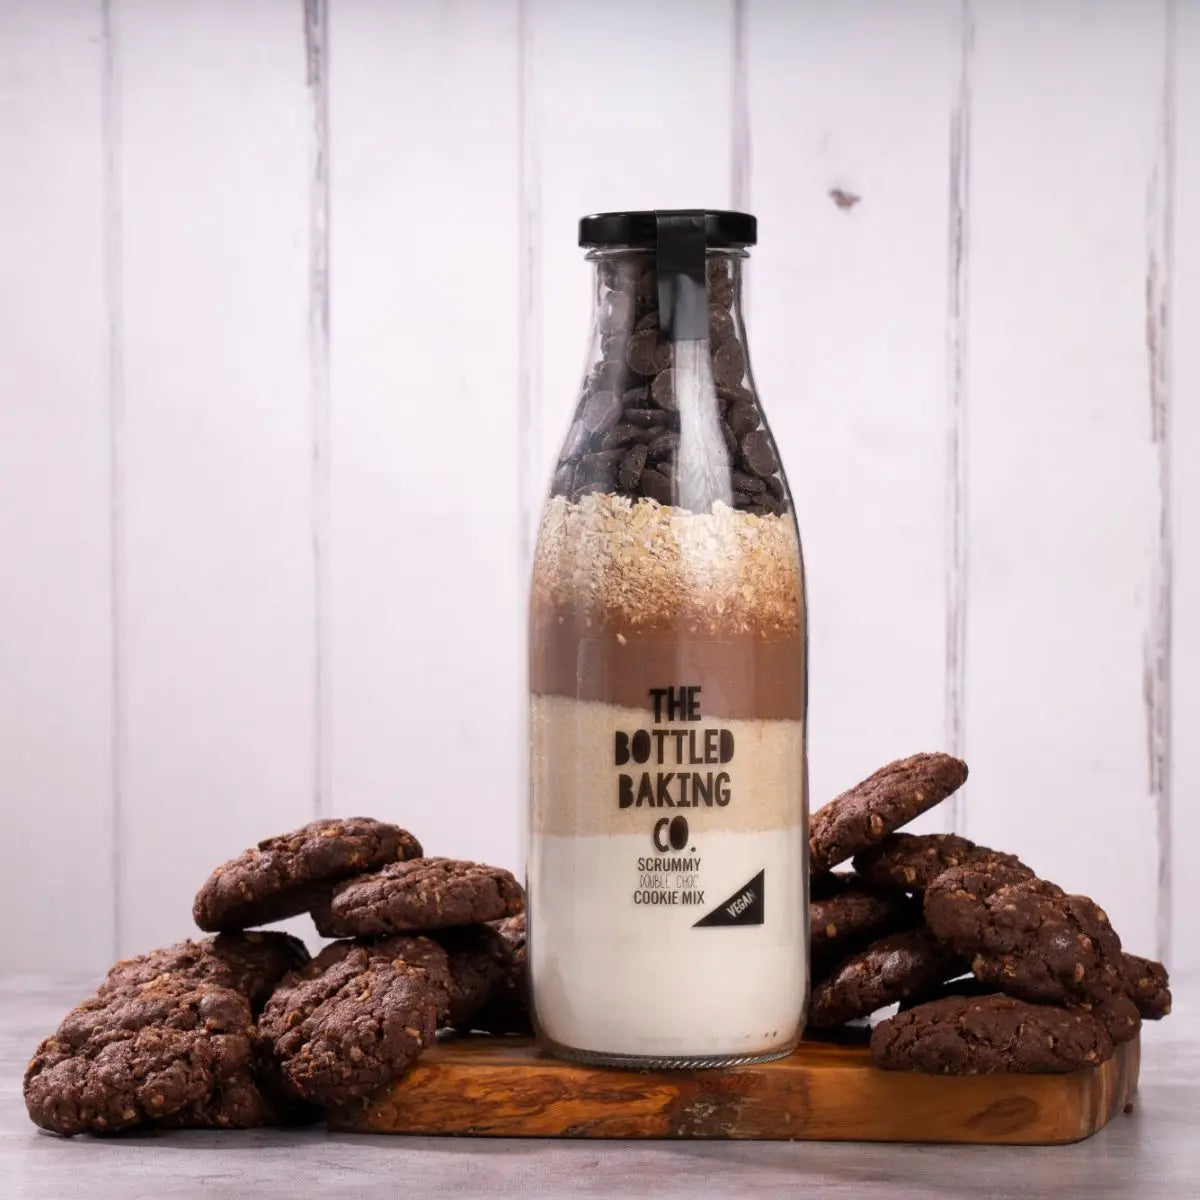 The Bottled Baking Co. - Double Choc Chip Vegan Cookie Baking Mix in a Bottle 750ml